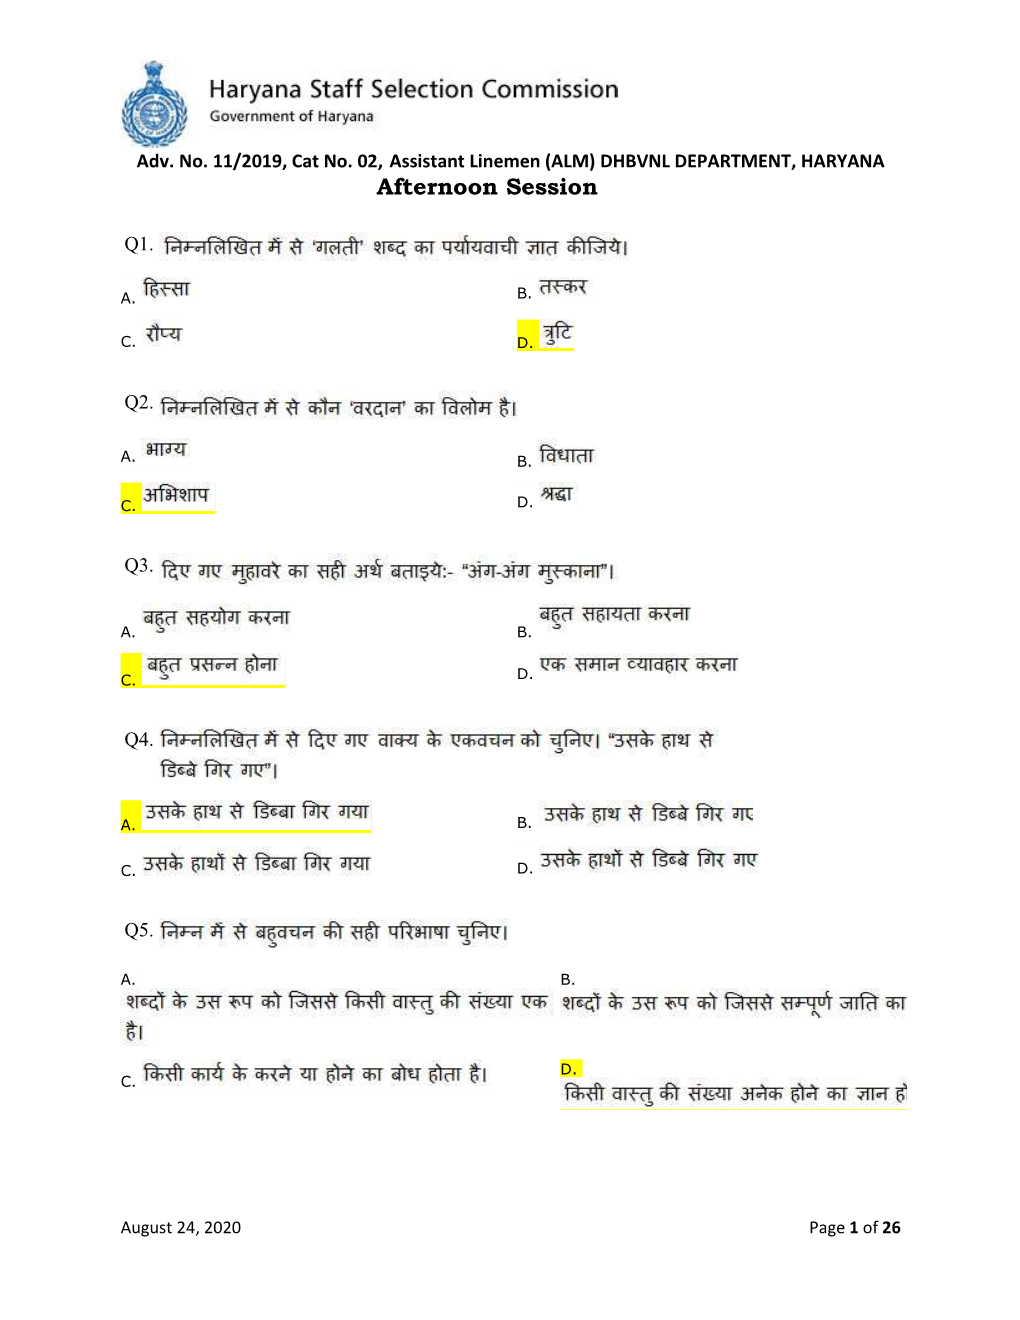 Adv. No. 11/2019, Cat No. 02, Assistant Linemen (ALM) DHBVNL DEPARTMENT, HARYANA Afternoon Session